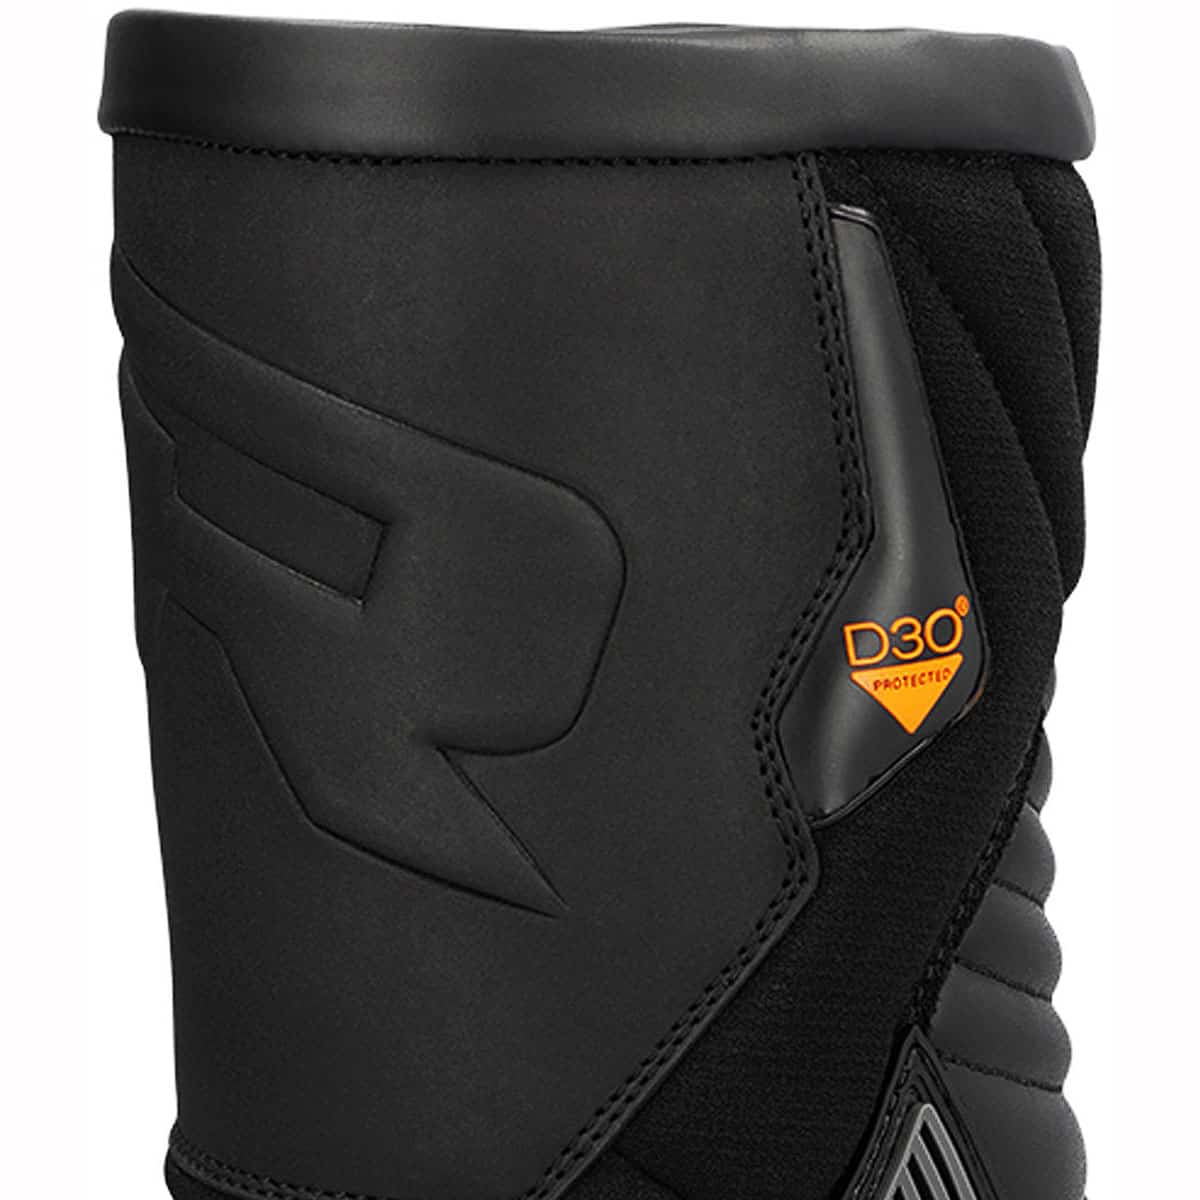 Richa waterproof touring boots with Ortholite sole for superior comfort off the 'bike - opening